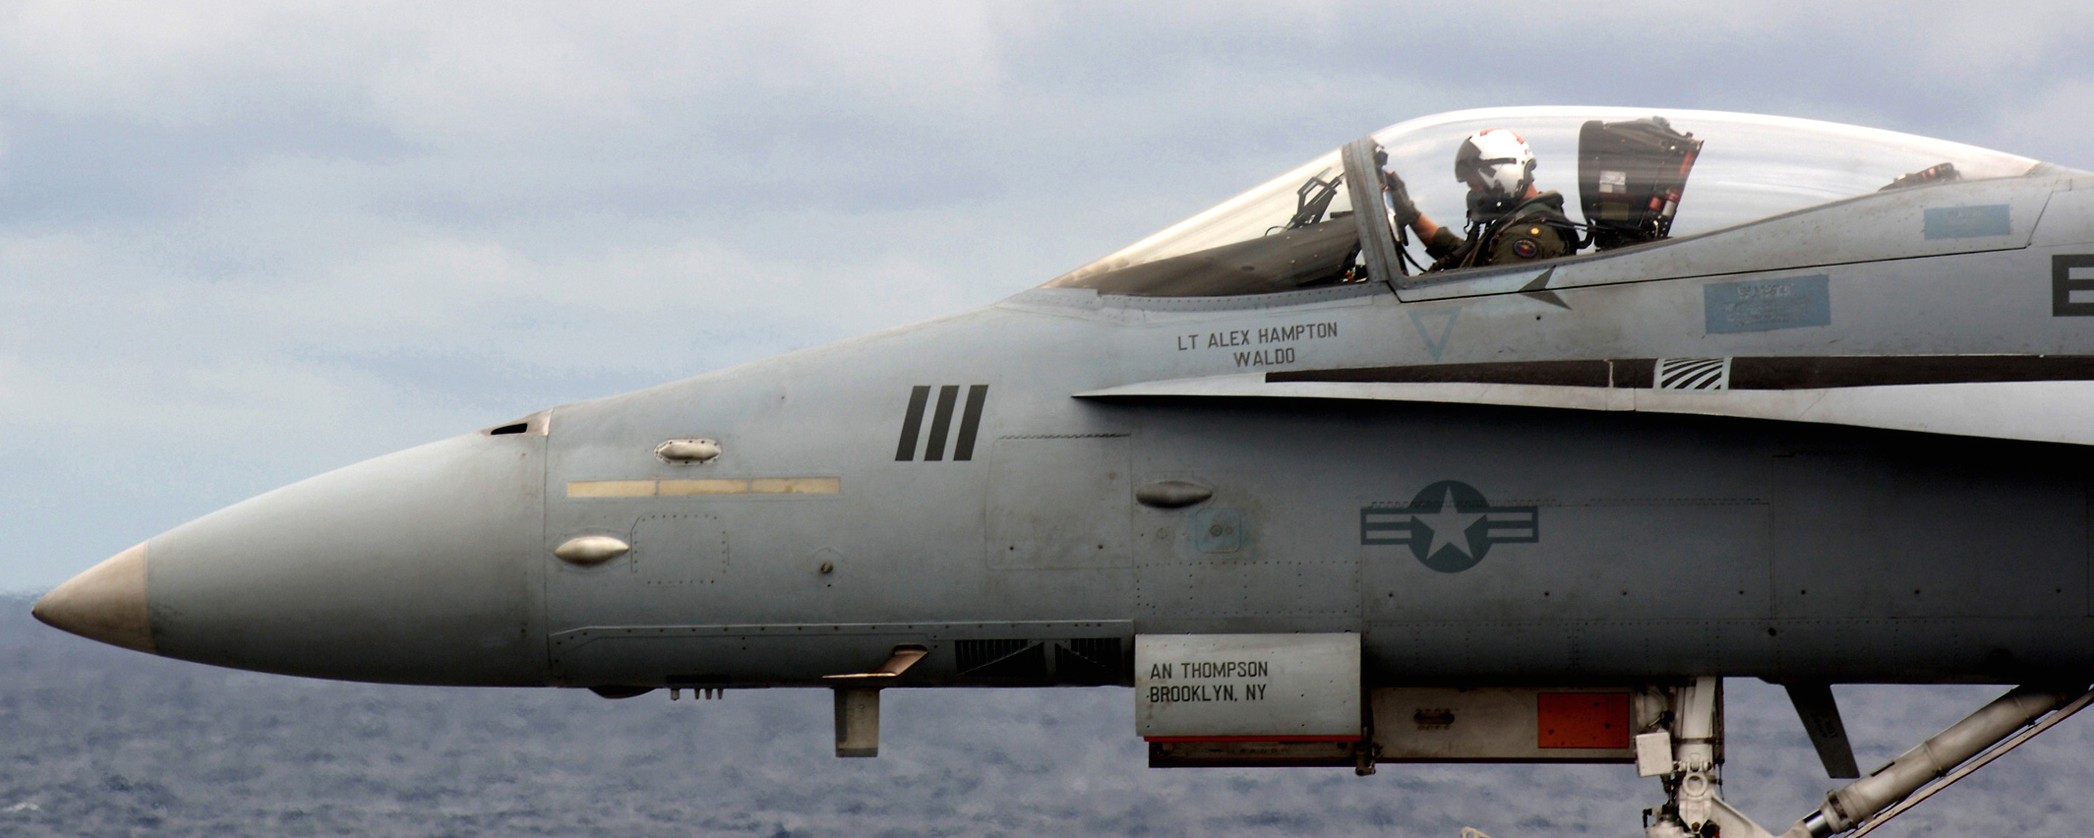 vfa-81 sunliners strike fighter squadron f/a-18c hornet 06